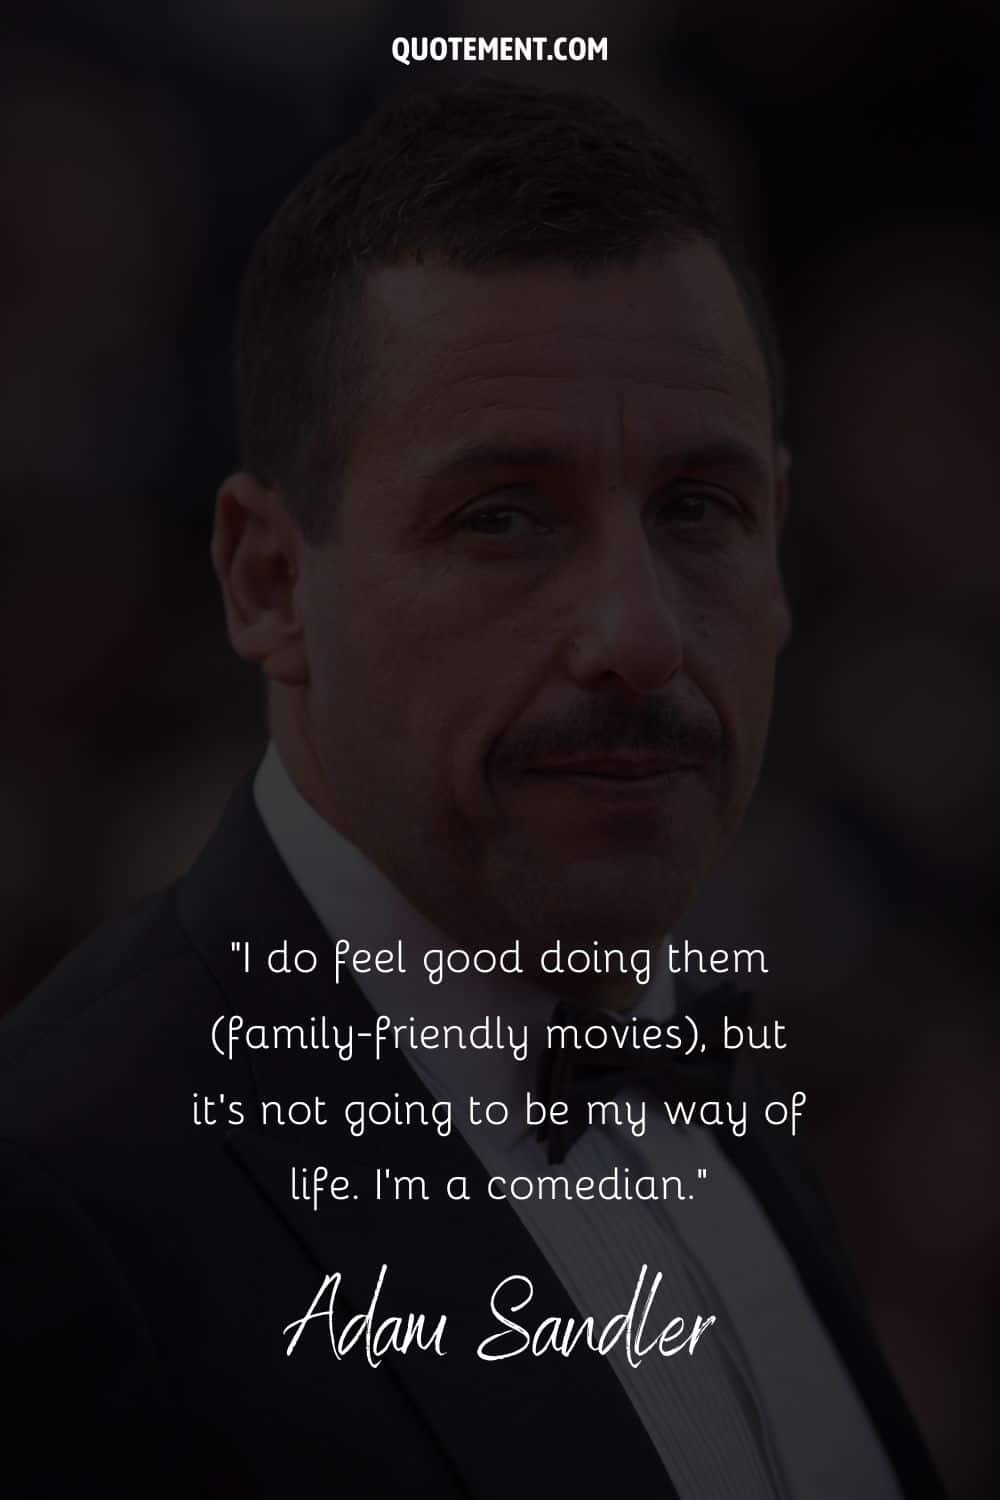 quote by Adam Sandler on doing family-friendly movies